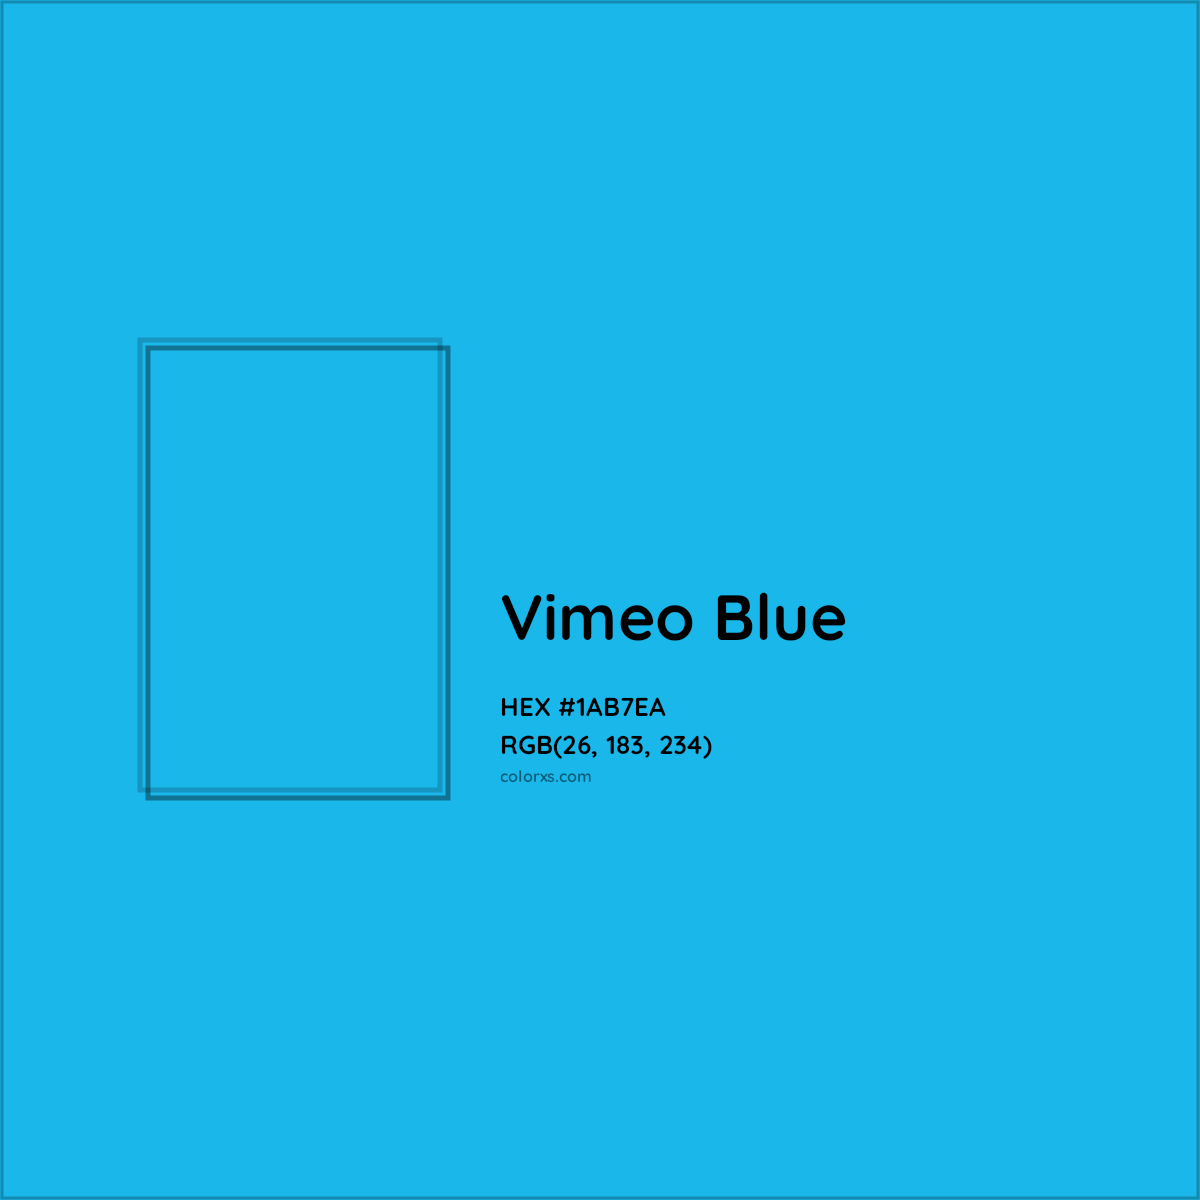 HEX #1AB7EA Vimeo Blue Other Brand - Color Code